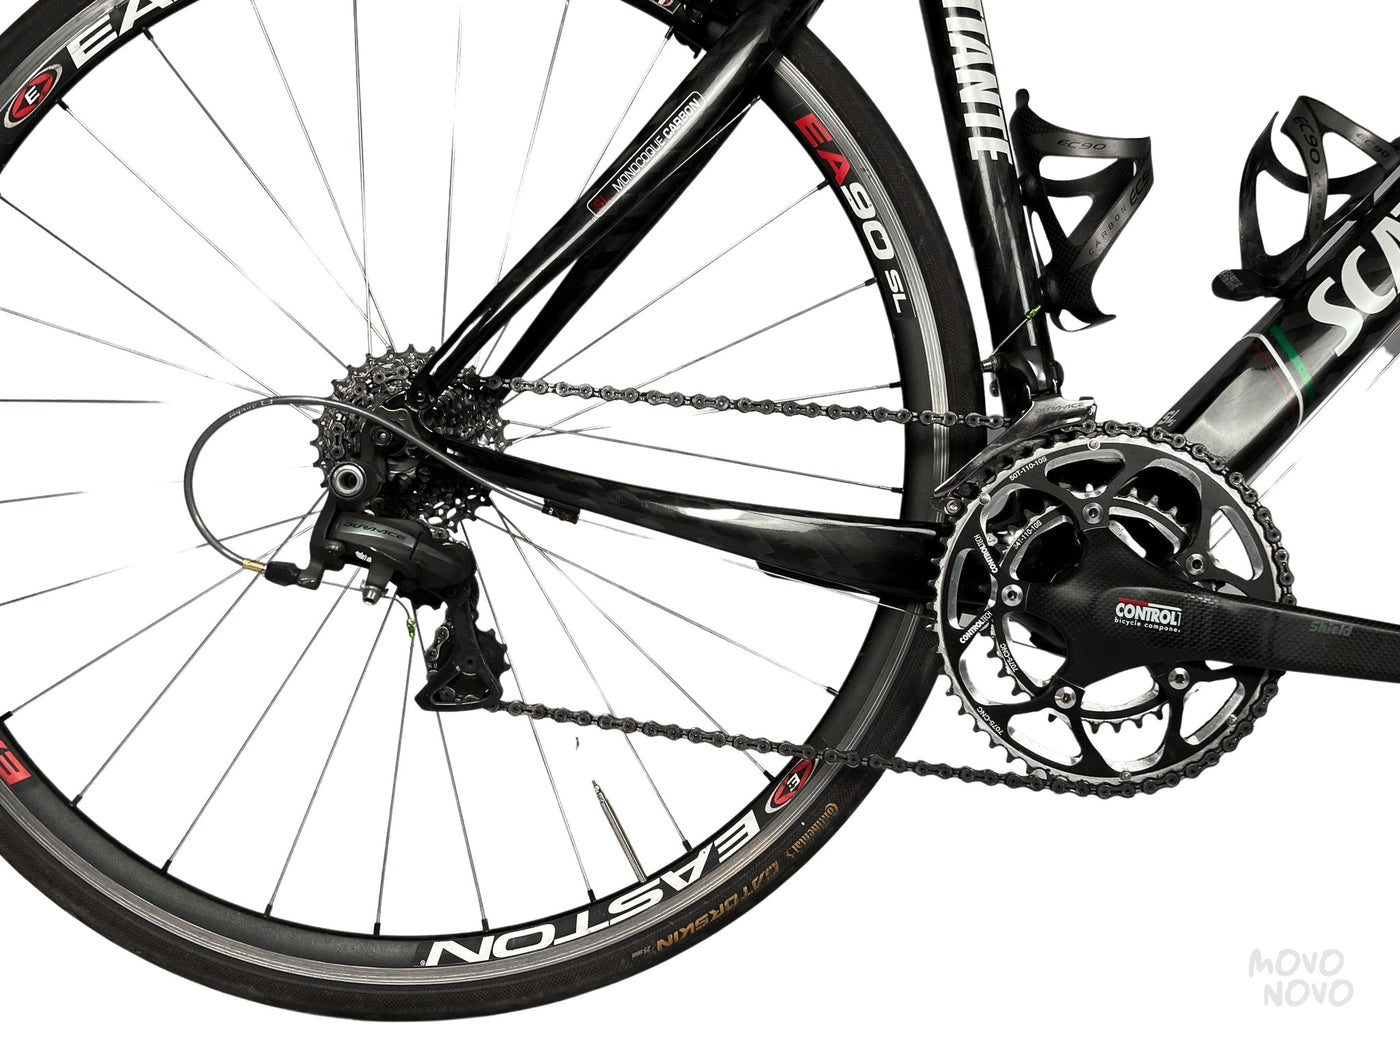 Scattante Team CFR 2012 - S - Bicycles